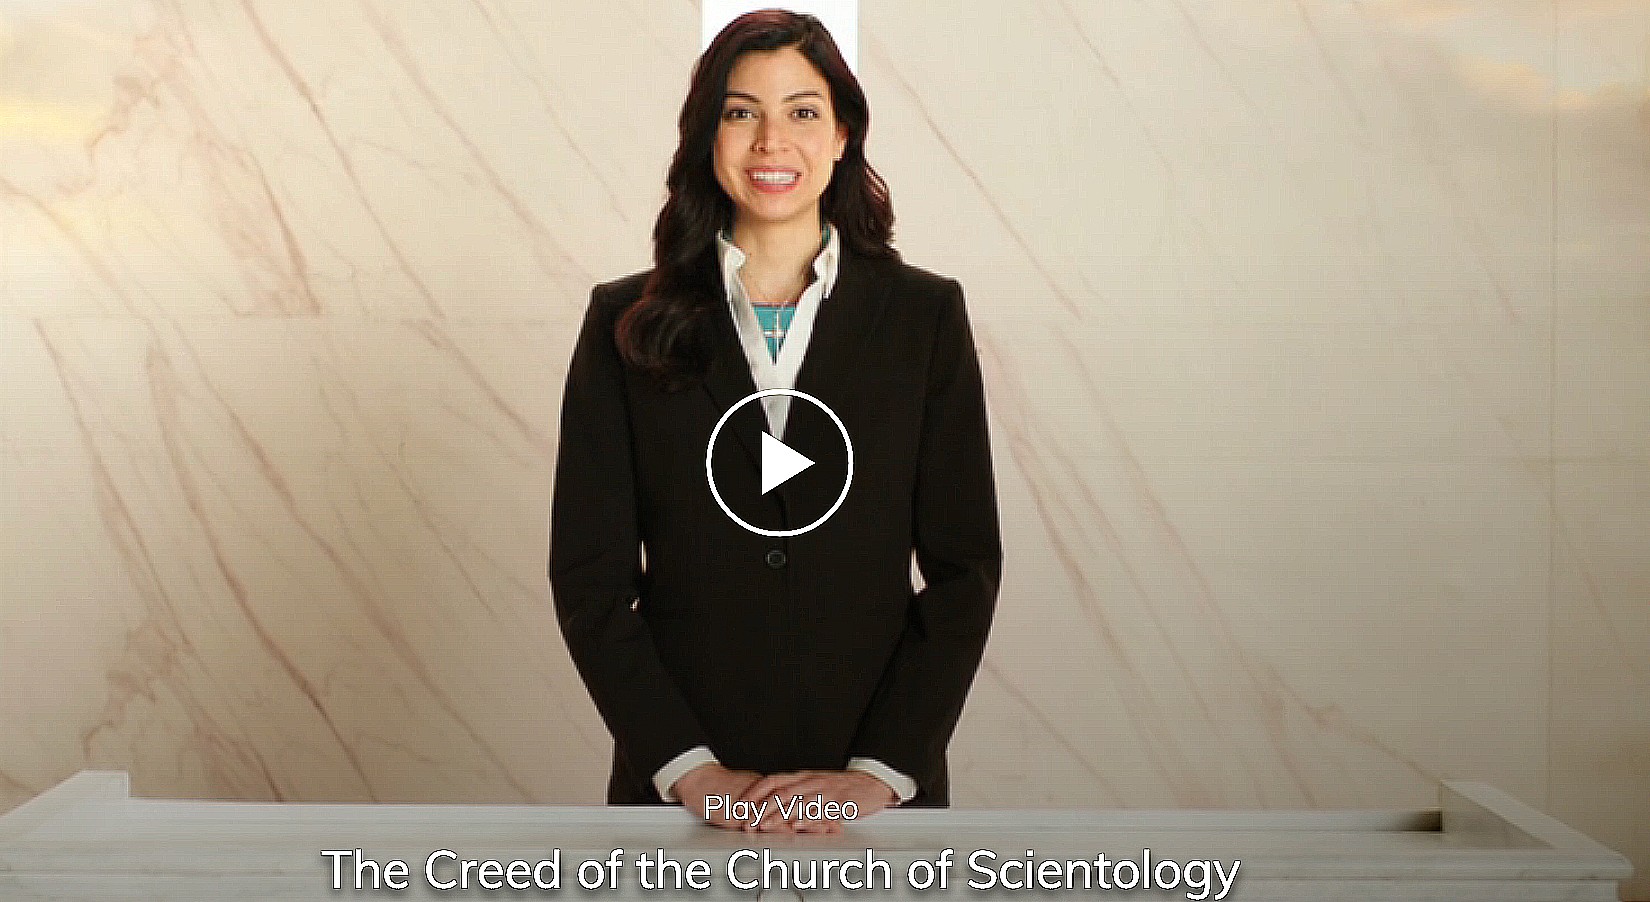 Creed of the Church of Scientology